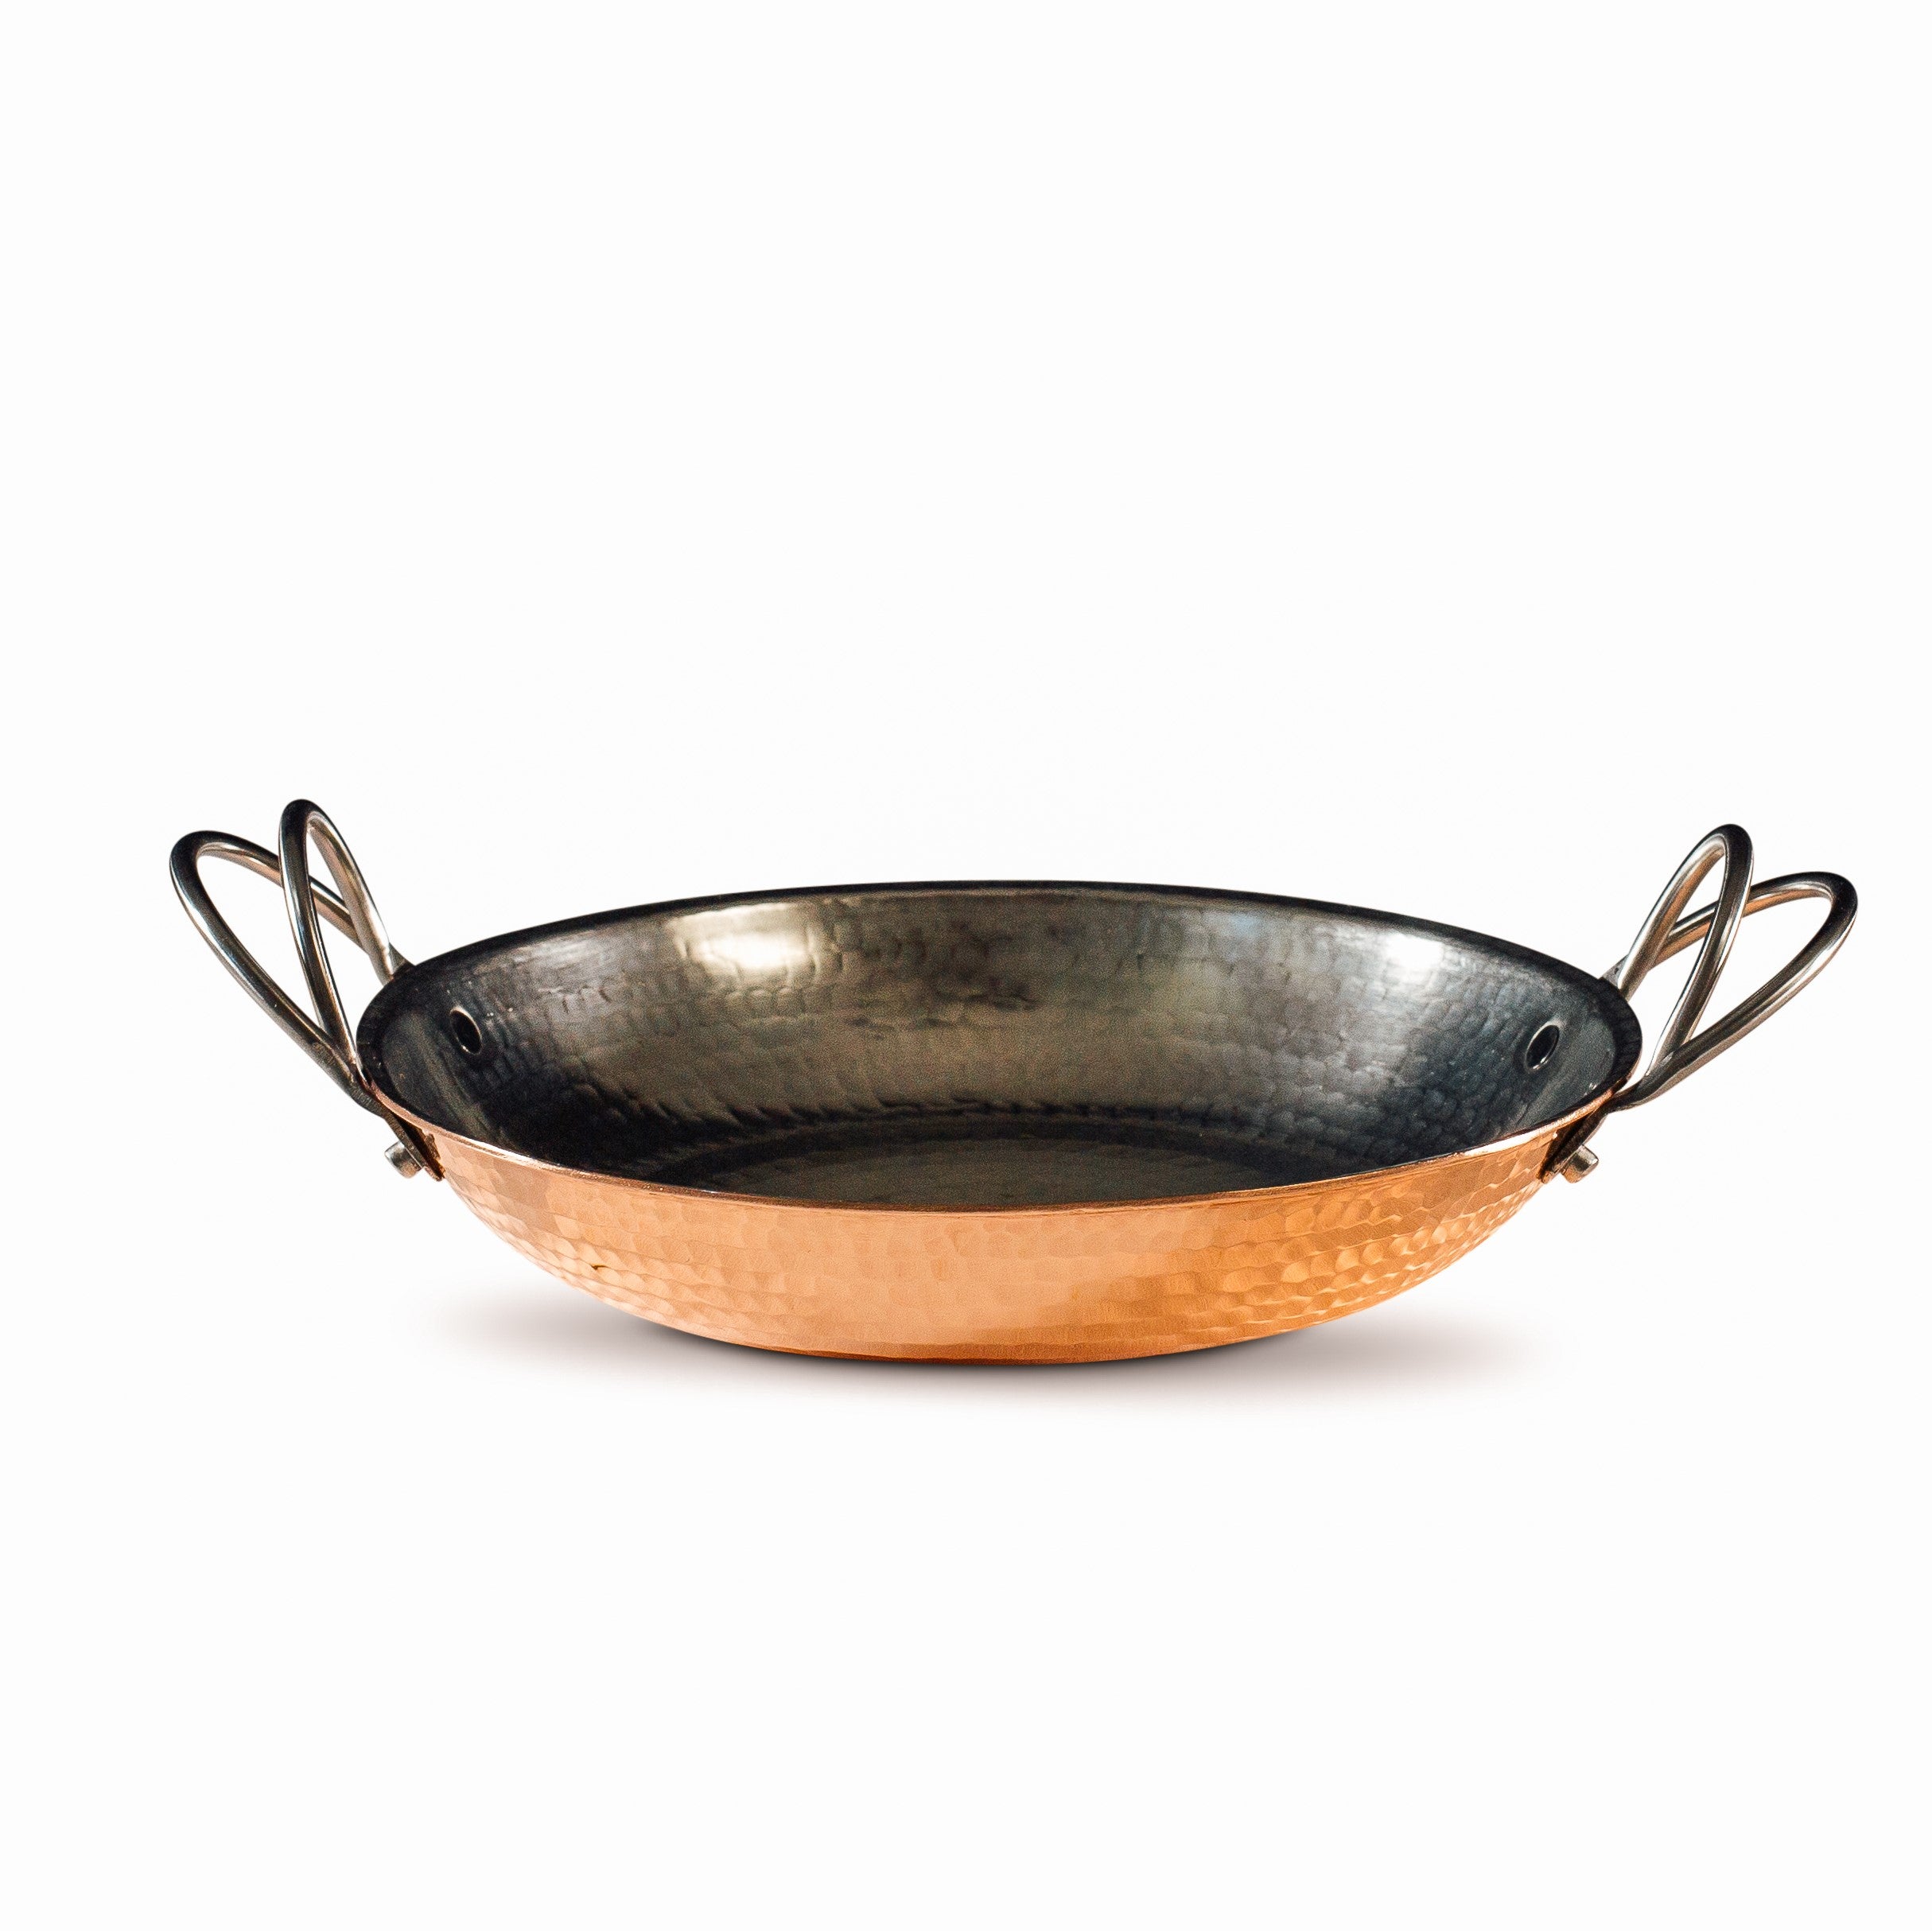 Small pan Mumbai 0.25 L hammered stainless steel copper look